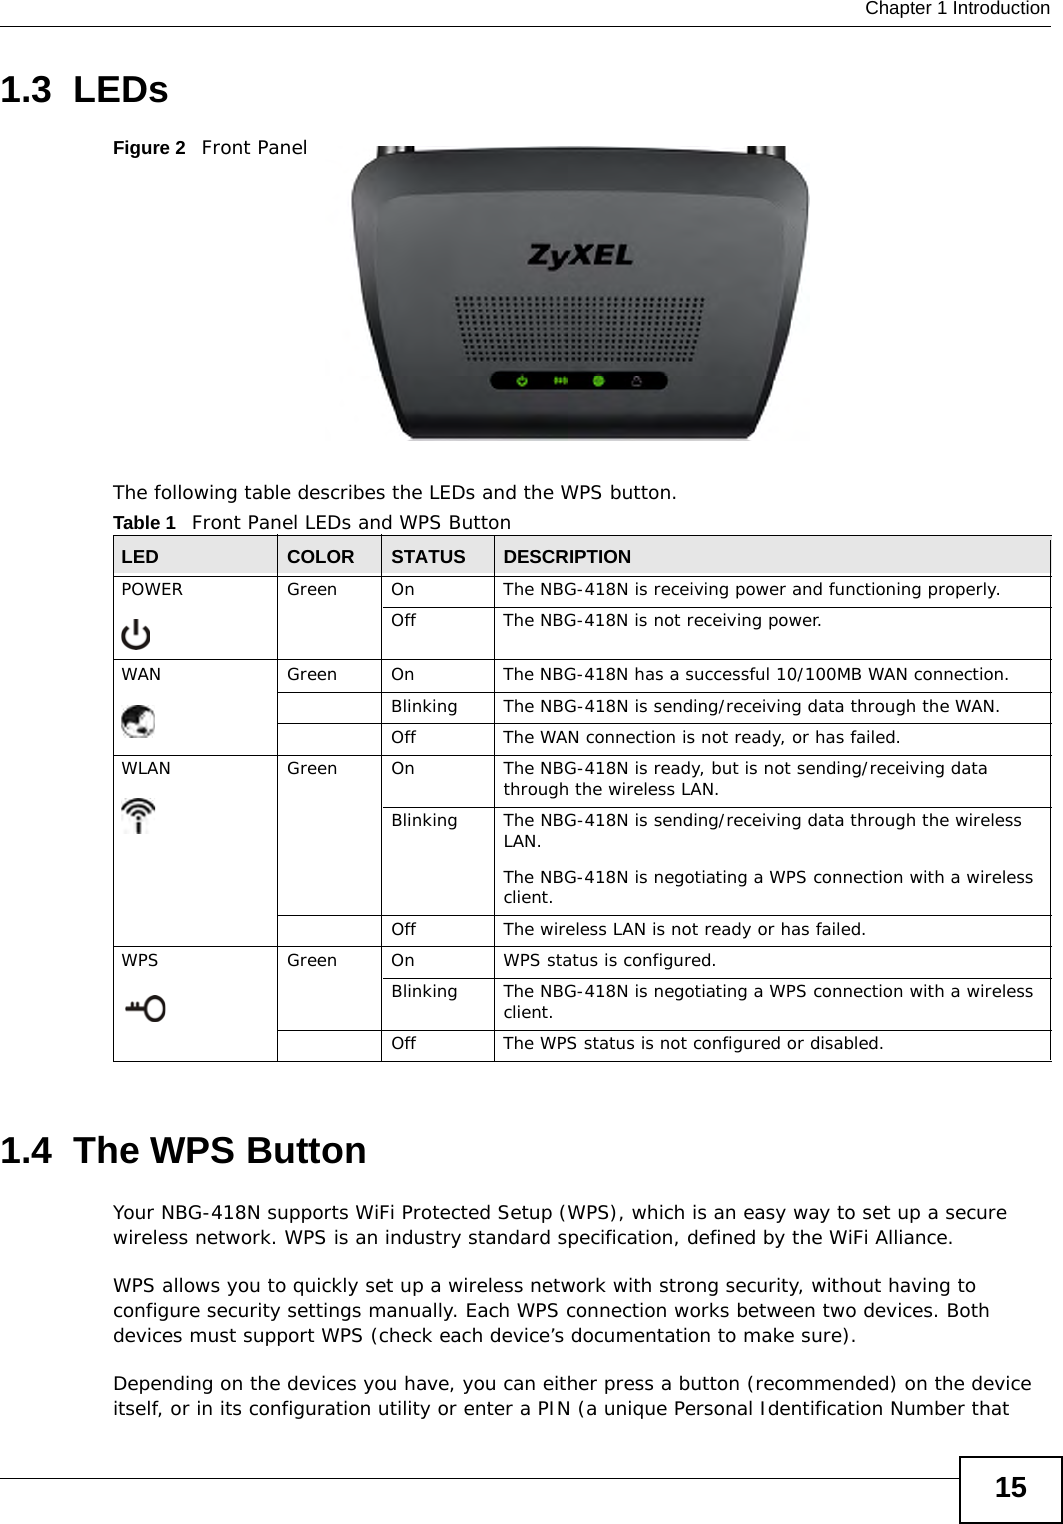  Chapter 1 Introduction151.3  LEDsFigure 2   Front PanelThe following table describes the LEDs and the WPS button.1.4  The WPS ButtonYour NBG-418N supports WiFi Protected Setup (WPS), which is an easy way to set up a secure wireless network. WPS is an industry standard specification, defined by the WiFi Alliance.WPS allows you to quickly set up a wireless network with strong security, without having to configure security settings manually. Each WPS connection works between two devices. Both devices must support WPS (check each device’s documentation to make sure). Depending on the devices you have, you can either press a button (recommended) on the device itself, or in its configuration utility or enter a PIN (a unique Personal Identification Number that Table 1   Front Panel LEDs and WPS ButtonLED COLOR STATUS DESCRIPTIONPOWER Green On The NBG-418N is receiving power and functioning properly. Off The NBG-418N is not receiving power.WAN Green On The NBG-418N has a successful 10/100MB WAN connection.Blinking The NBG-418N is sending/receiving data through the WAN.Off The WAN connection is not ready, or has failed.WLAN  Green On The NBG-418N is ready, but is not sending/receiving data through the wireless LAN. Blinking The NBG-418N is sending/receiving data through the wireless LAN.The NBG-418N is negotiating a WPS connection with a wireless client.Off The wireless LAN is not ready or has failed.WPS Green On WPS status is configured. Blinking The NBG-418N is negotiating a WPS connection with a wireless client.Off The WPS status is not configured or disabled.